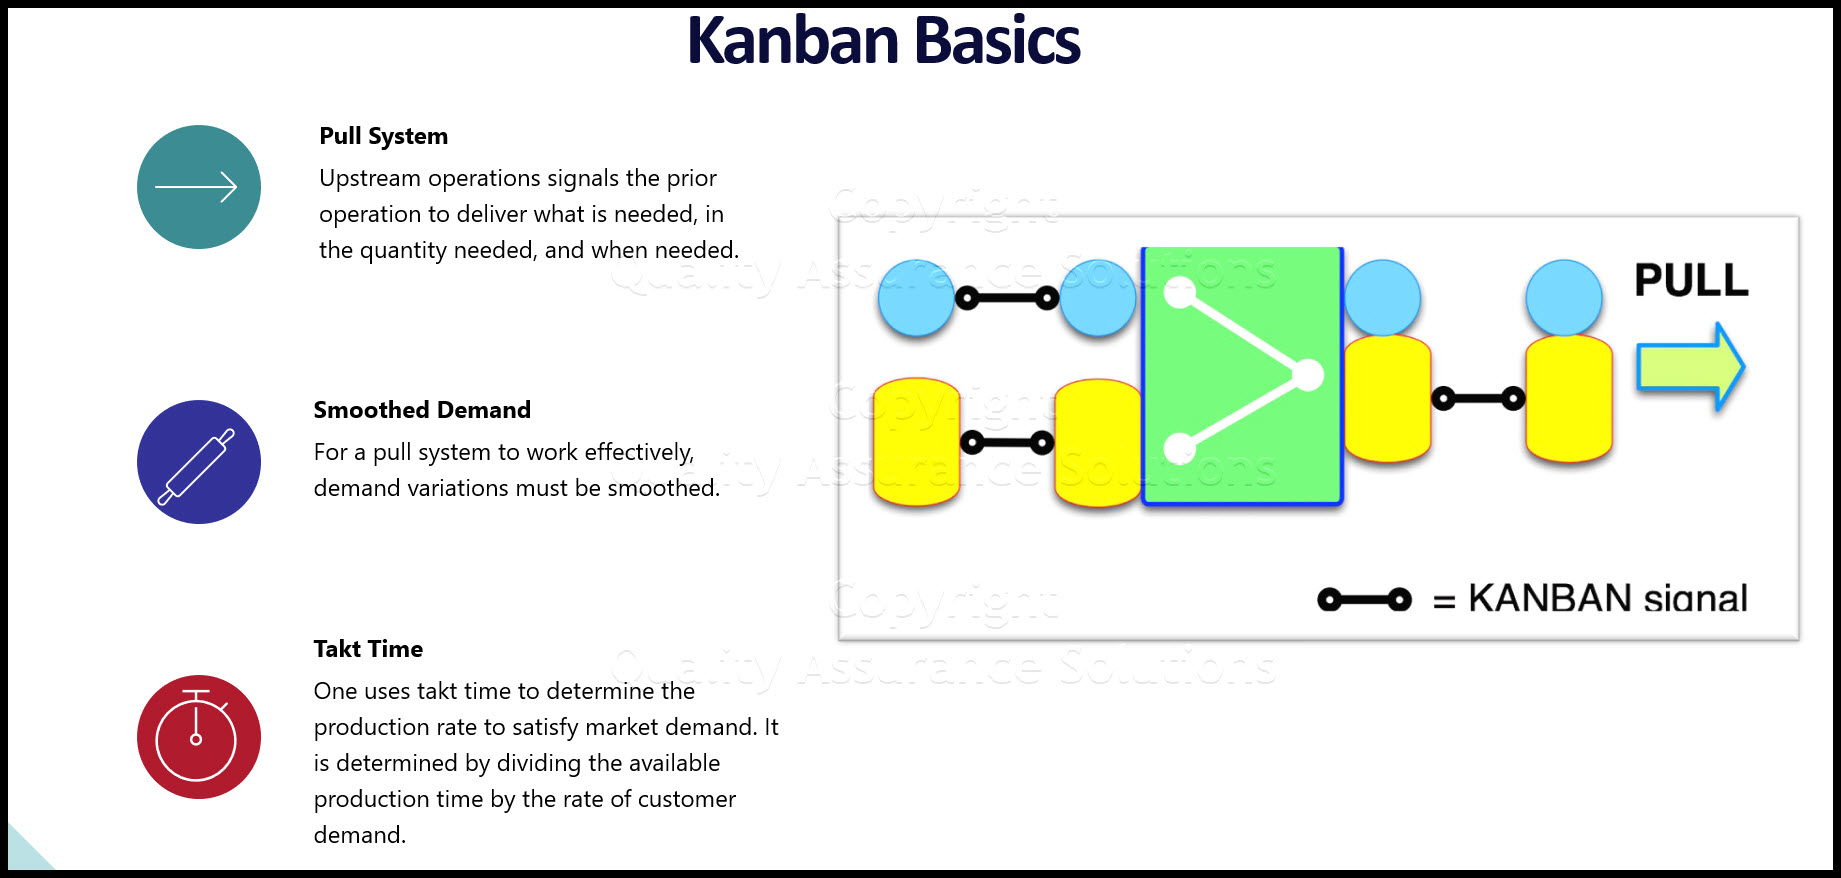 Kanban is a Japanese word that means card or signal. This is an important tool for improving production from a push to a pull system